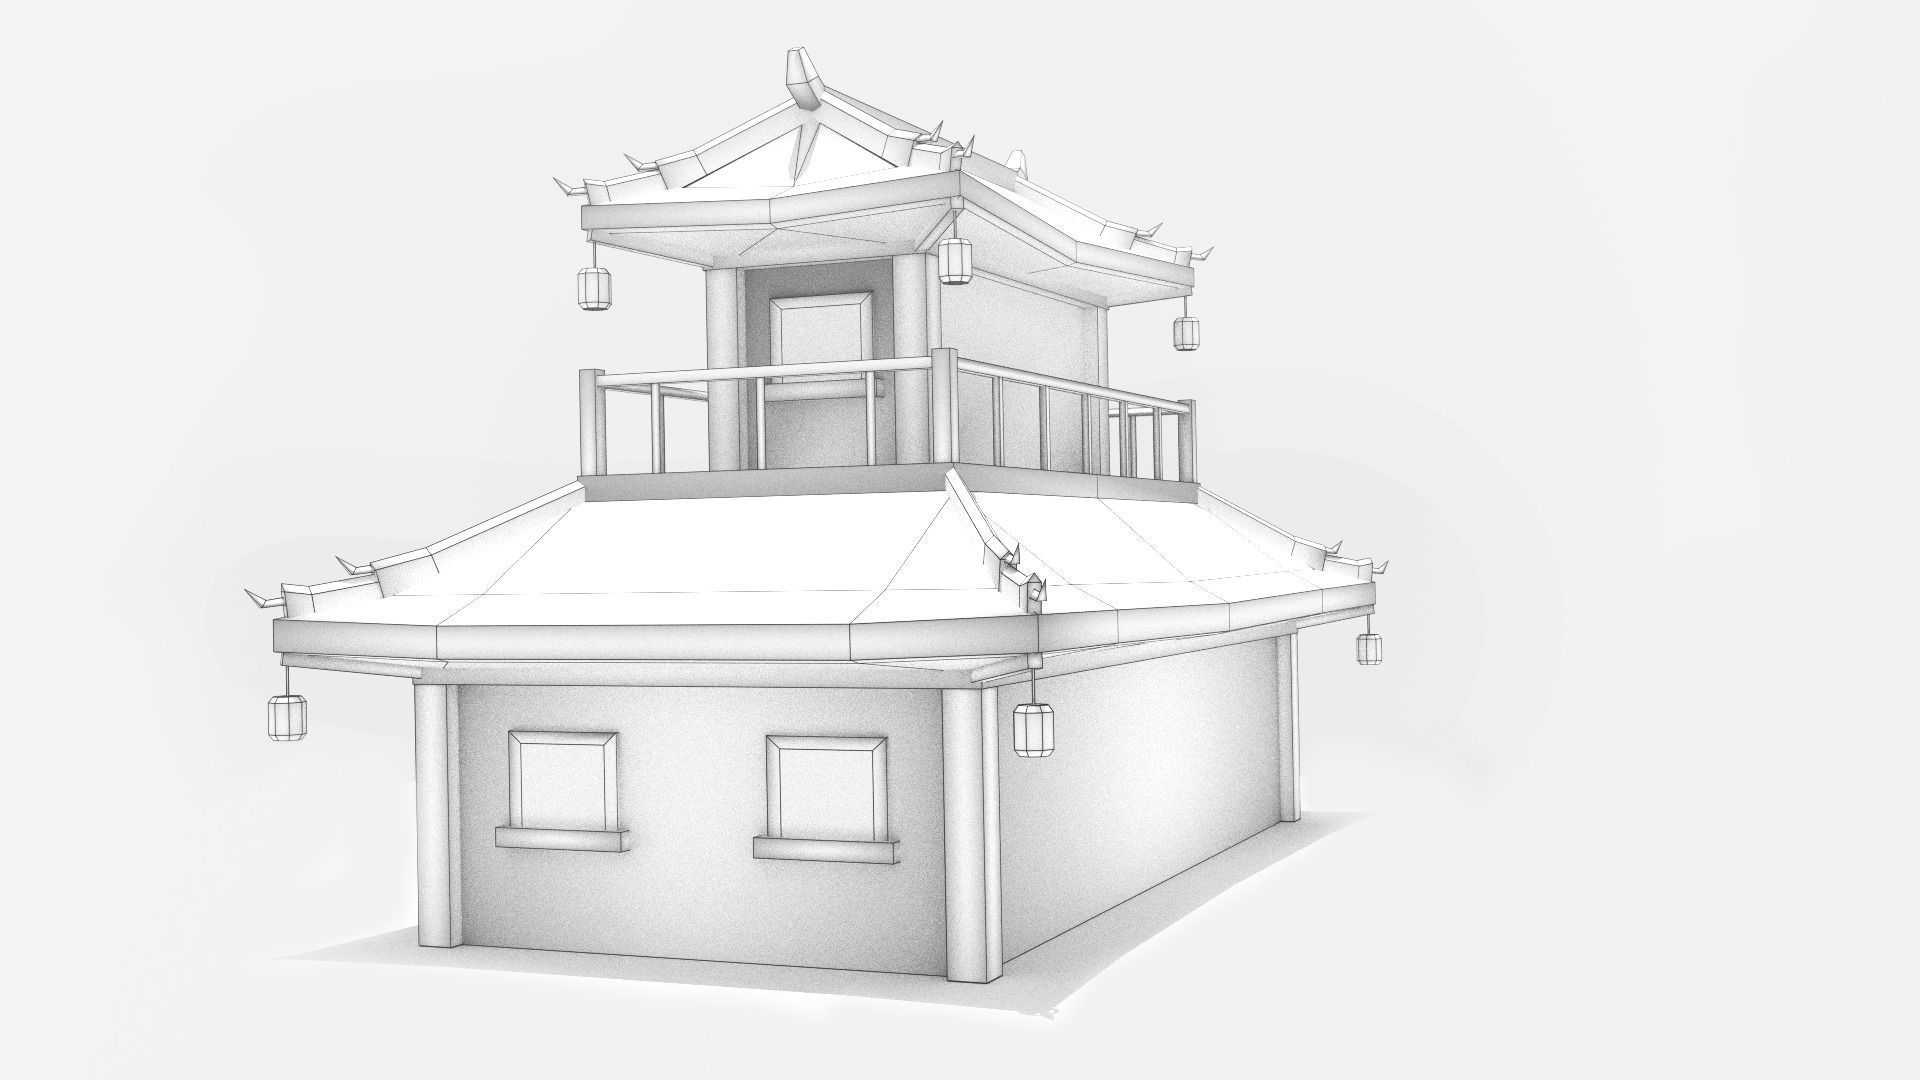 Chinese House Sketch at PaintingValley.com | Explore collection of